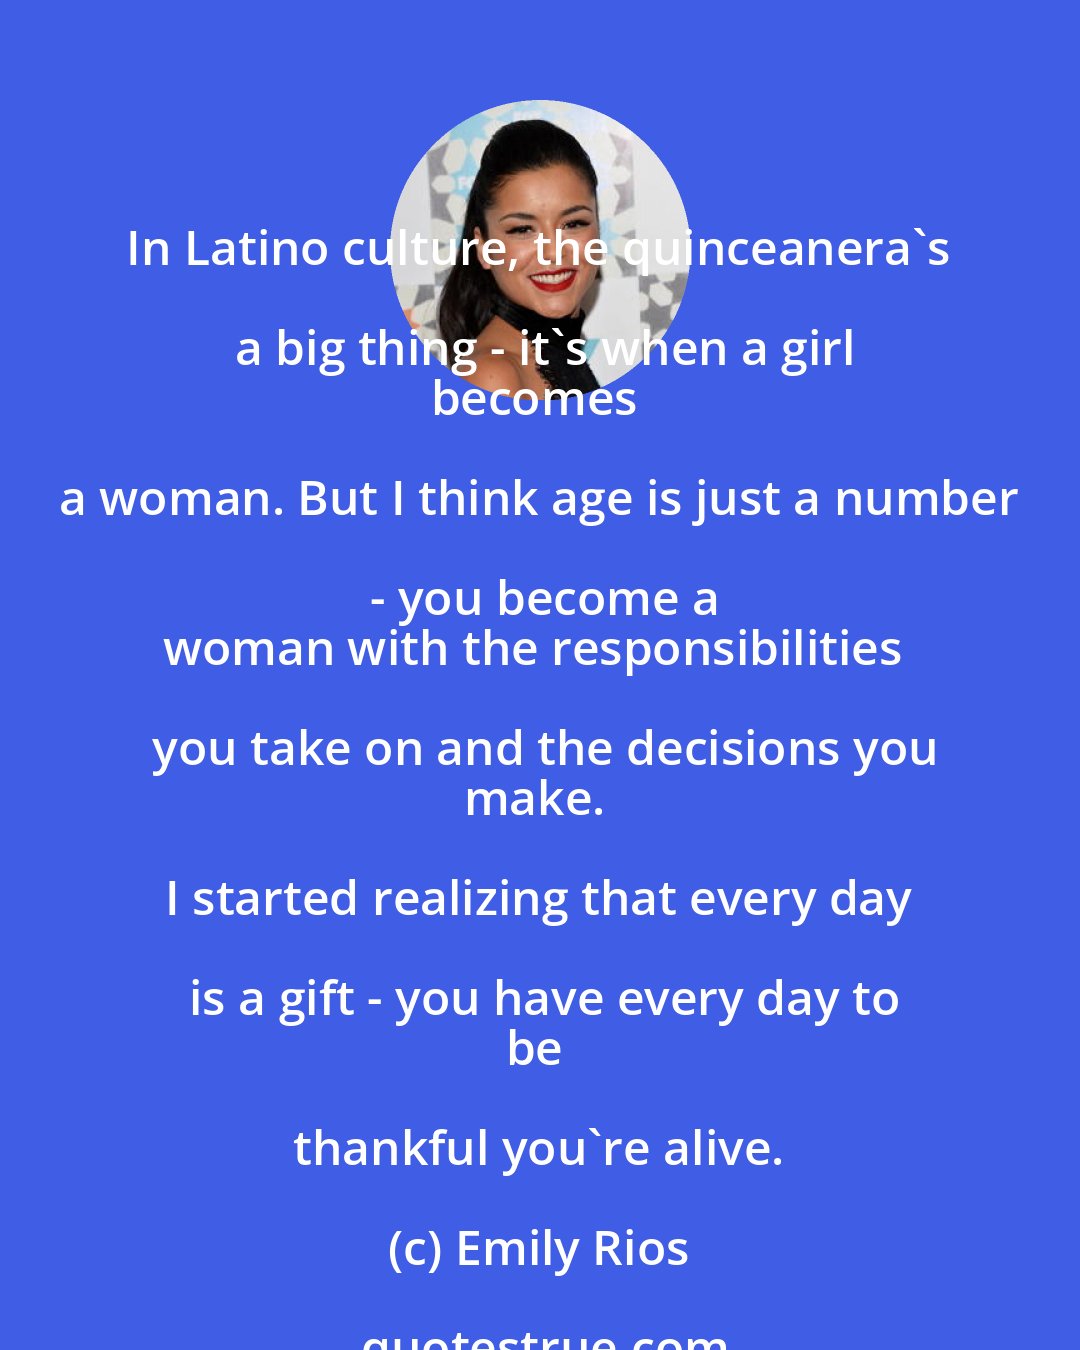 Emily Rios: In Latino culture, the quinceanera's a big thing - it's when a girl
becomes a woman. But I think age is just a number - you become a
woman with the responsibilities you take on and the decisions you
make. I started realizing that every day is a gift - you have every day to
be thankful you're alive.